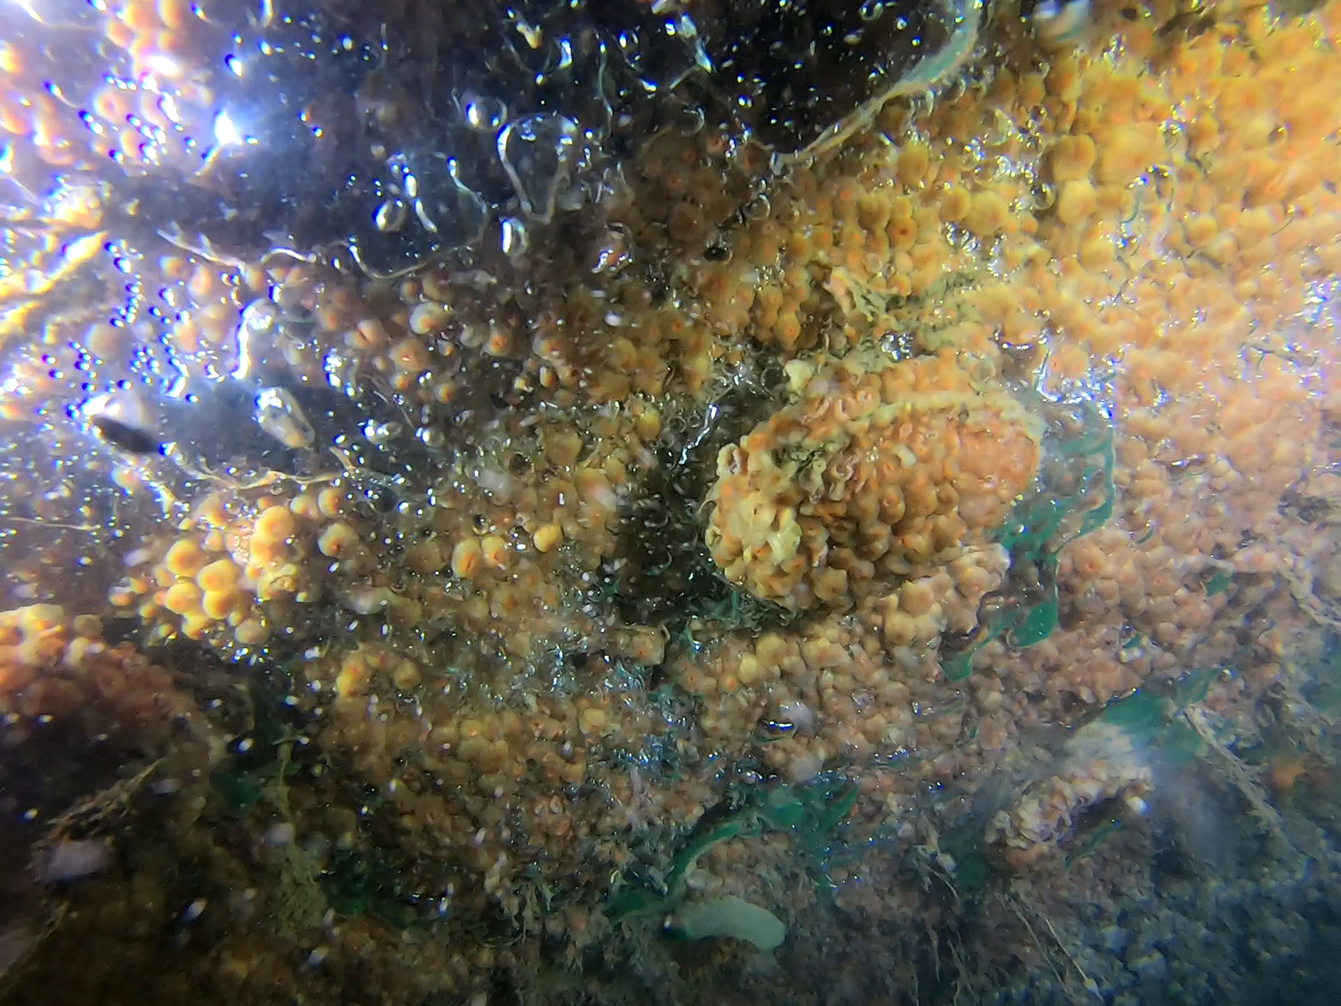 Native oyster covered in sponge